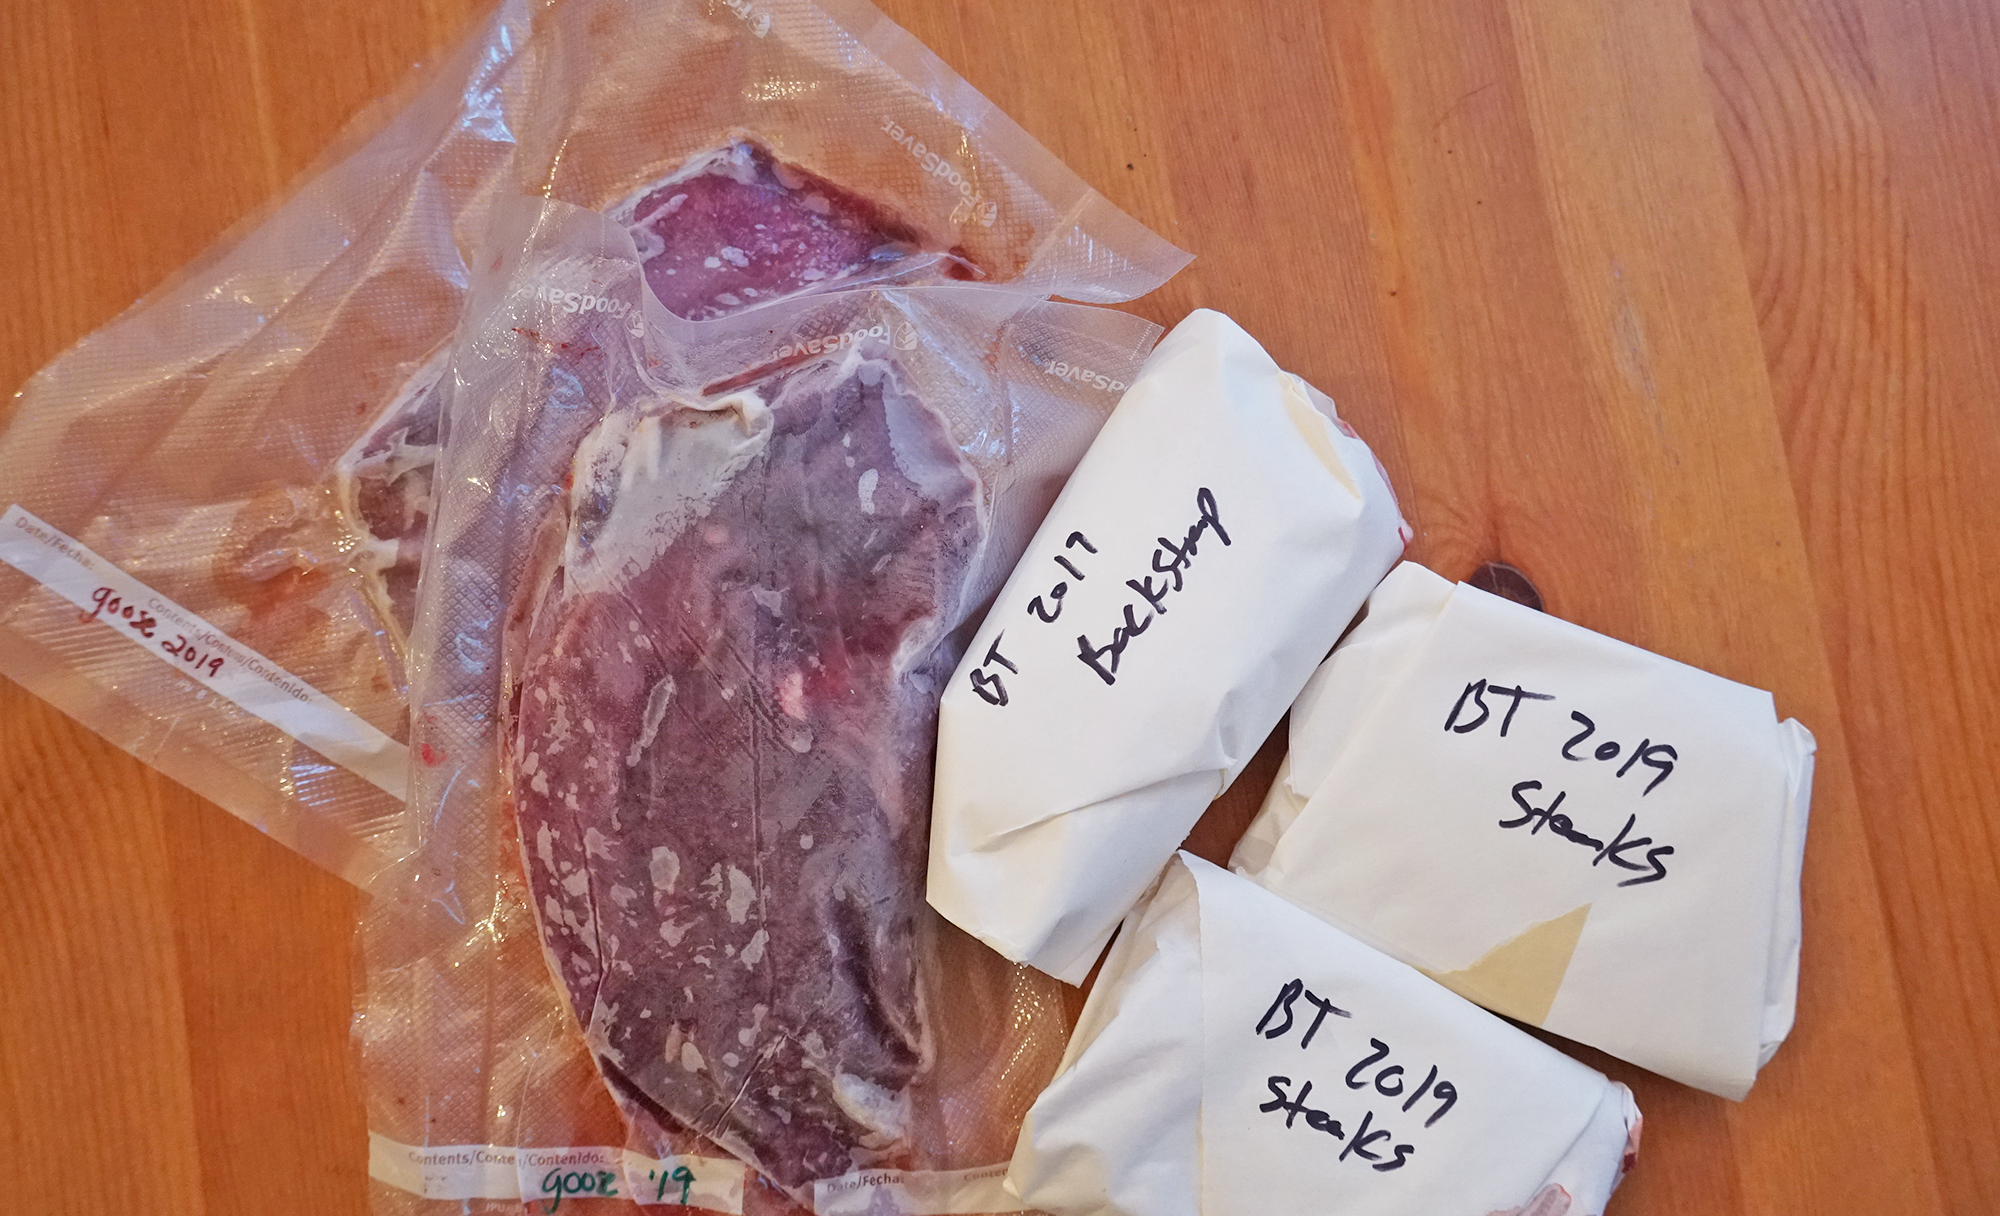 Freezer Bags For Meat?